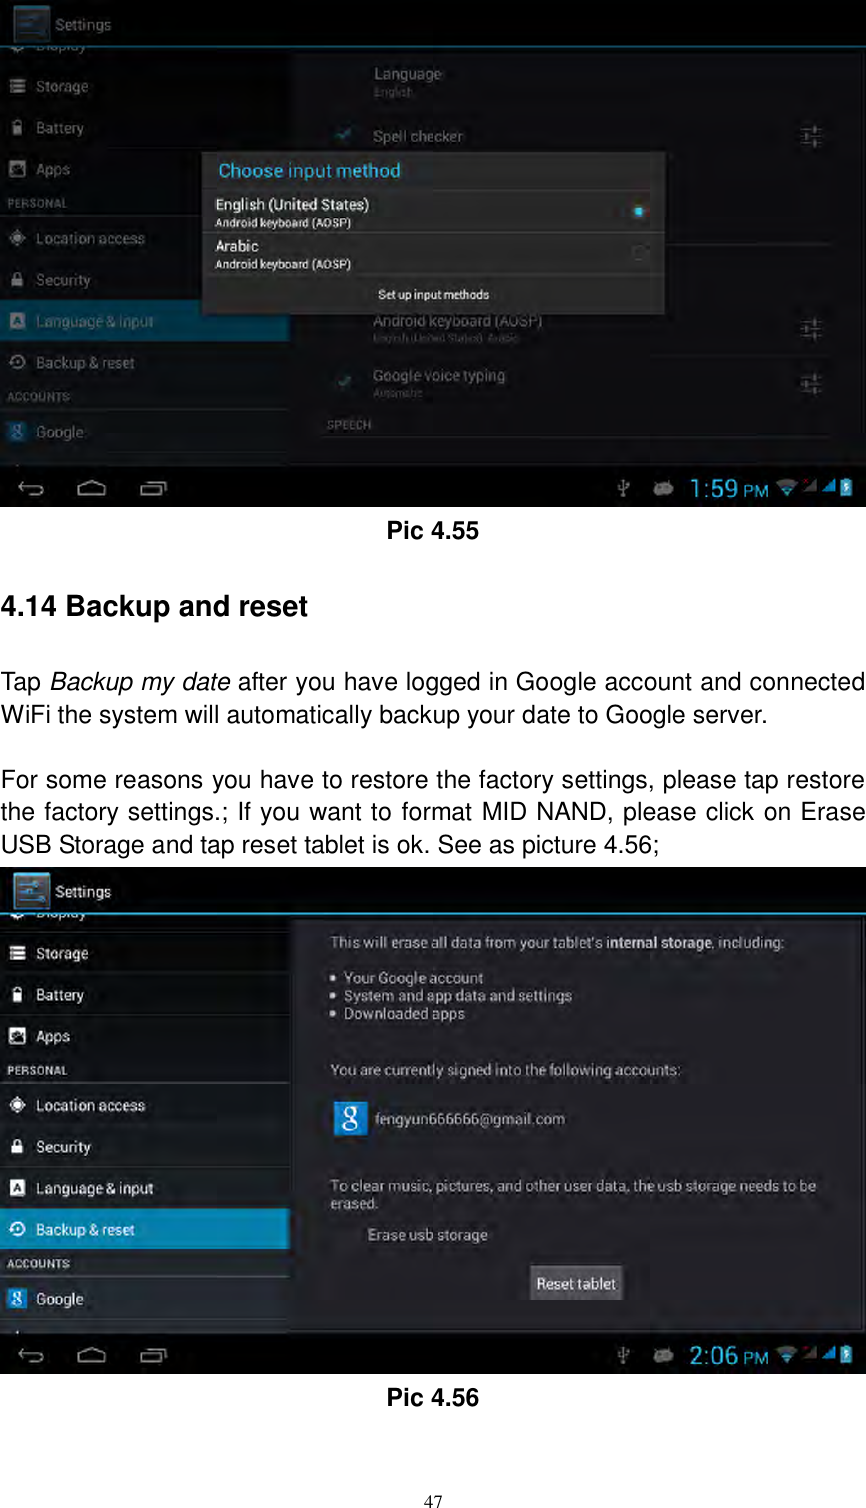      47  Pic 4.55 4.14 Backup and reset Tap Backup my date after you have logged in Google account and connected WiFi the system will automatically backup your date to Google server.  For some reasons you have to restore the factory settings, please tap restore the factory settings.; If you want to format MID NAND, please click on Erase USB Storage and tap reset tablet is ok. See as picture 4.56;  Pic 4.56 